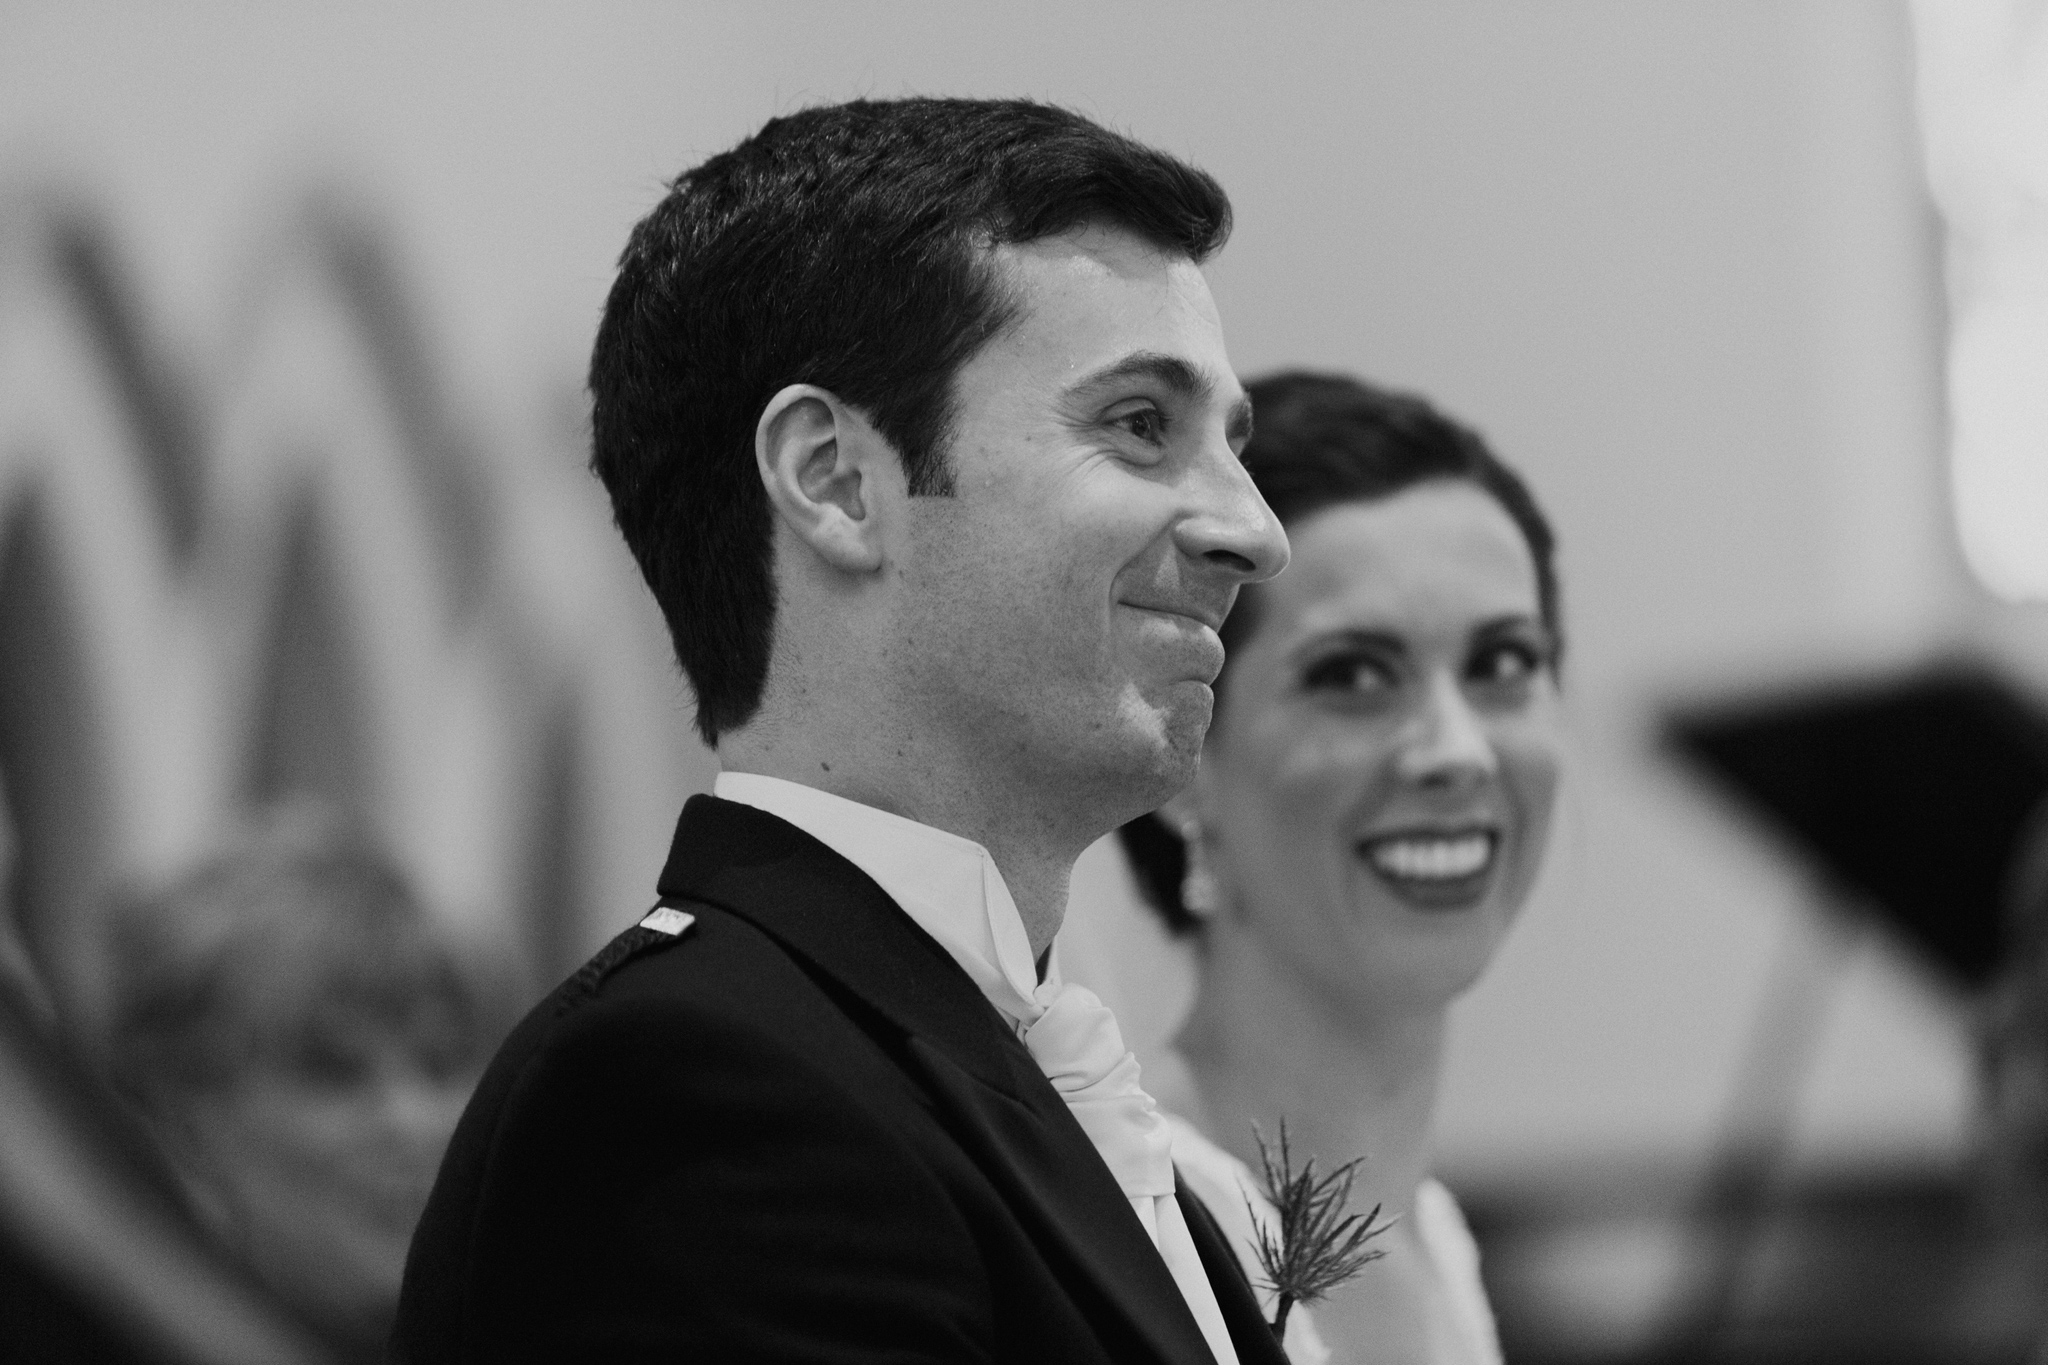 Bride smiles at groom while groom smiles and looks forward in church ceremony